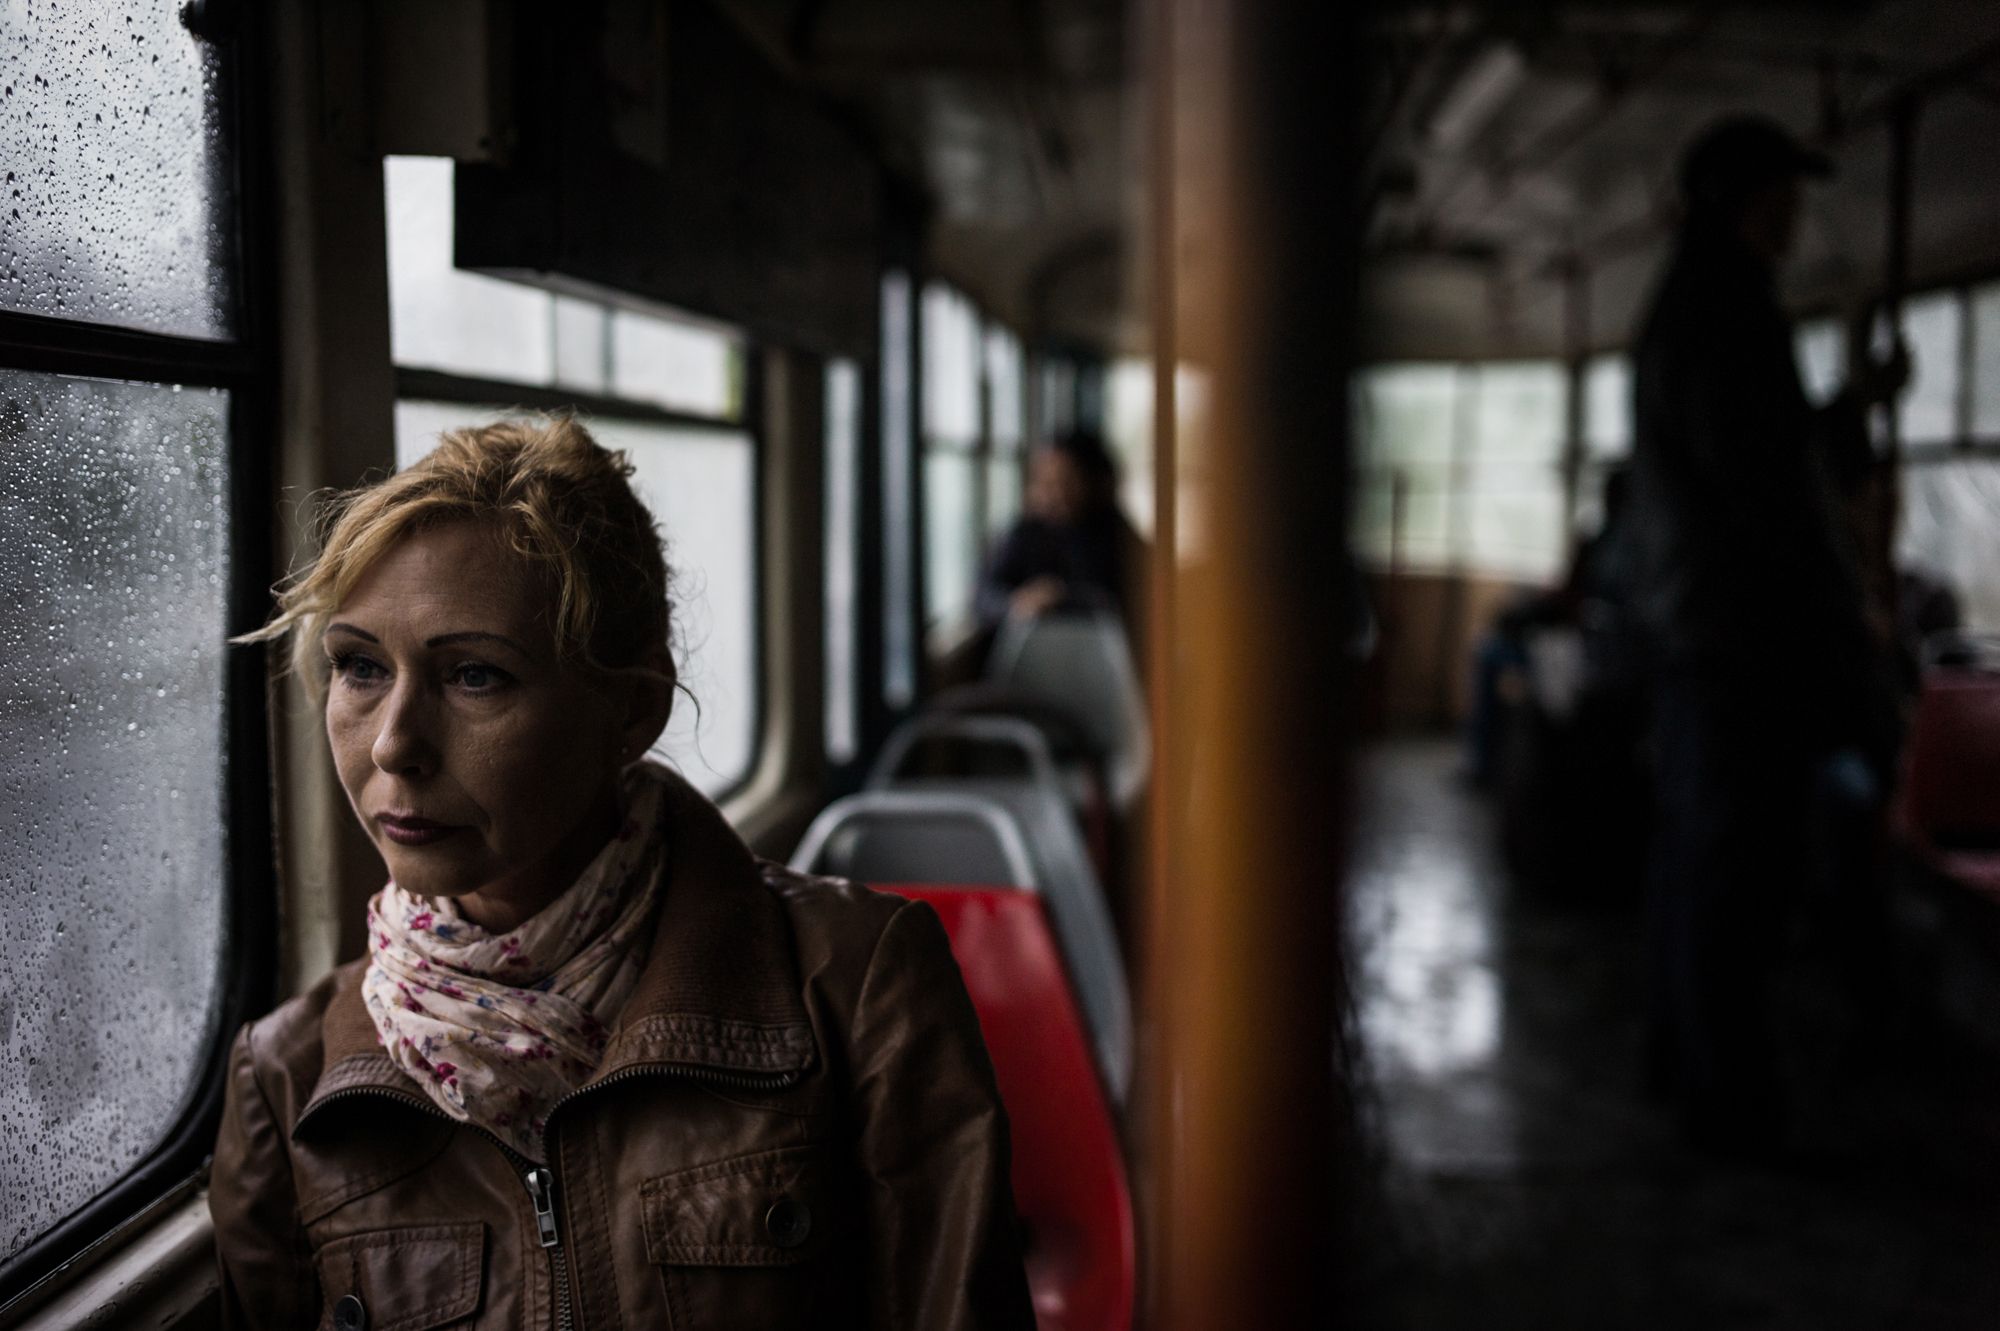 Olga on her way to a shelter for war-displaced people in Odessa. Image by Misha Friedman. Ukraine, 2016.